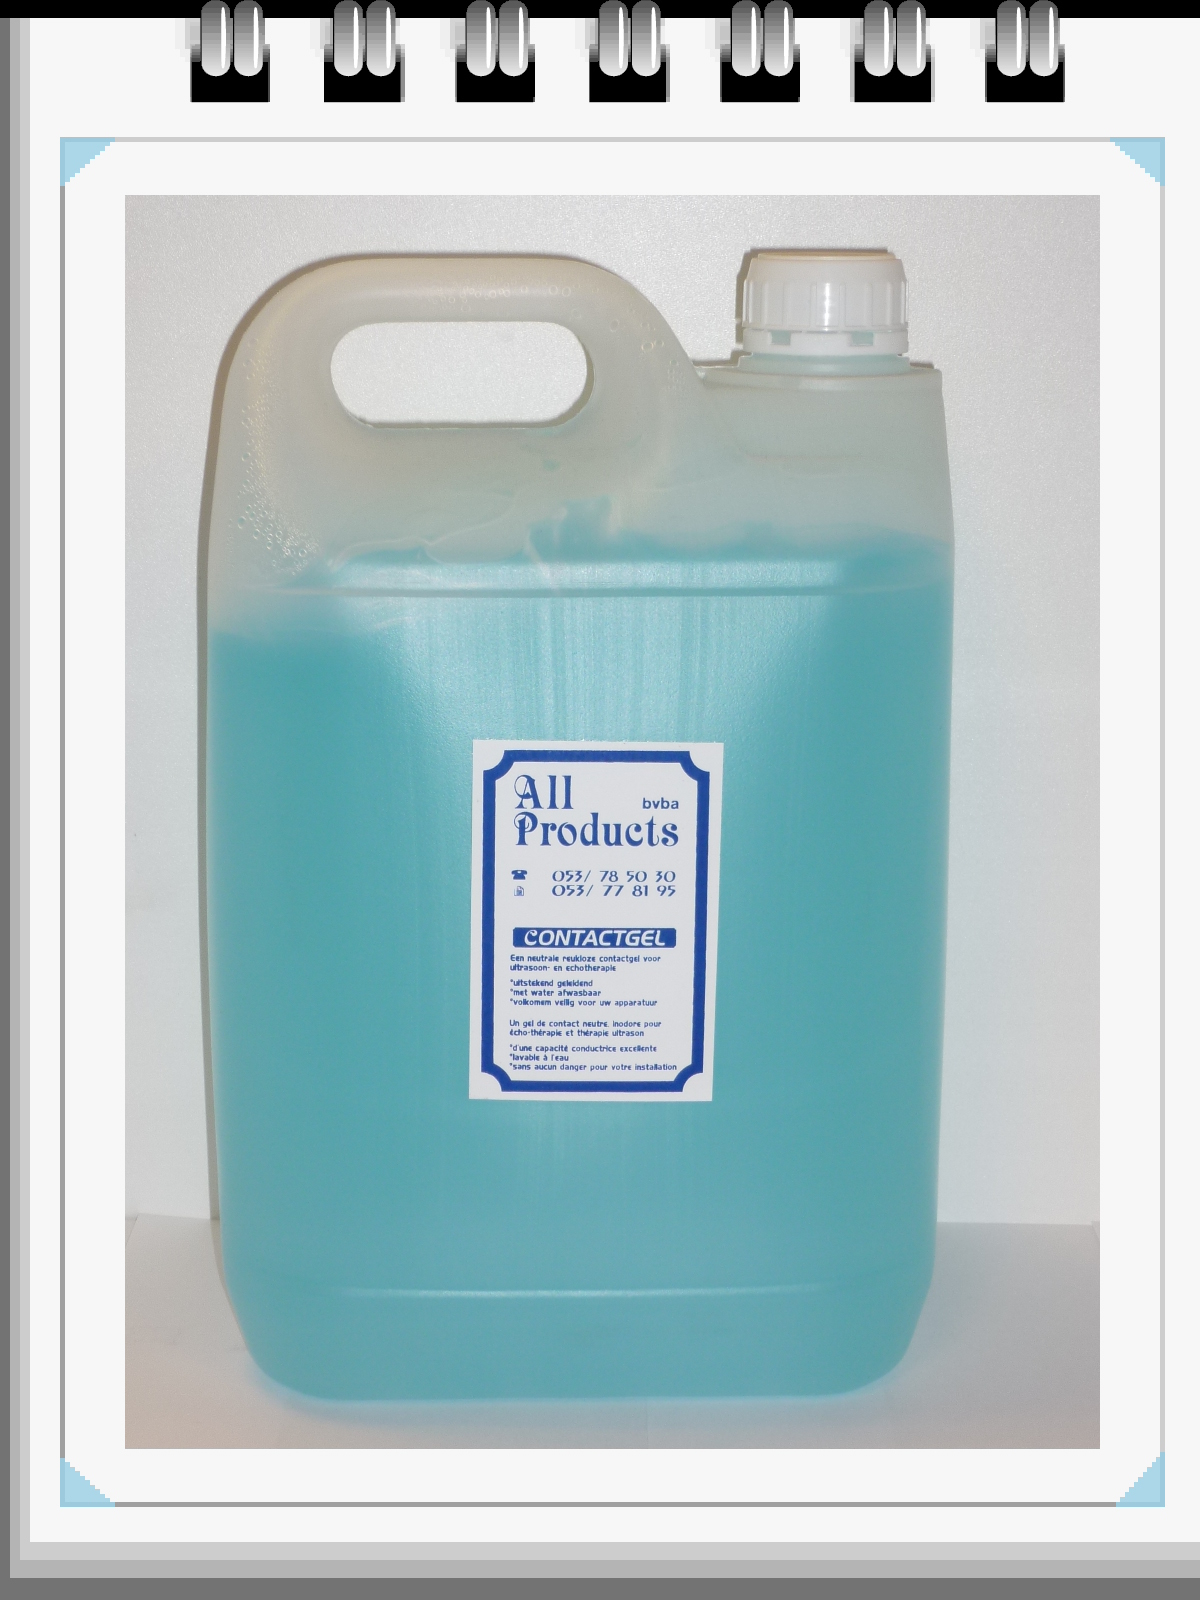 All Products - Ultrason Gel 5 Litre